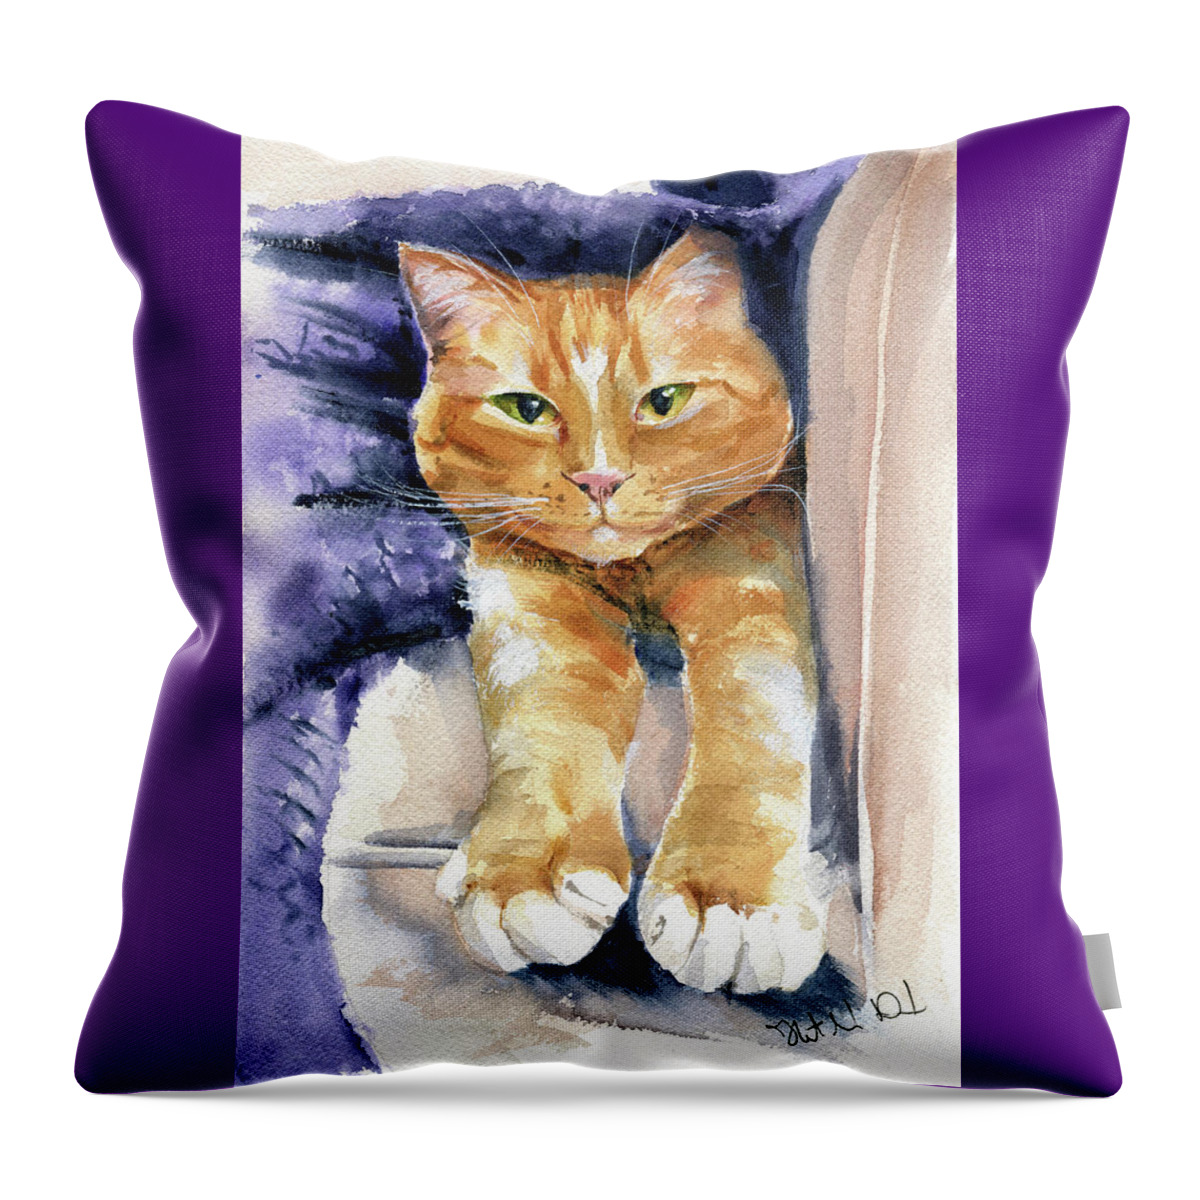 Sleepy Kitten Throw Pillow featuring the painting Sleepy Ginger Kitty Painting by Dora Hathazi Mendes